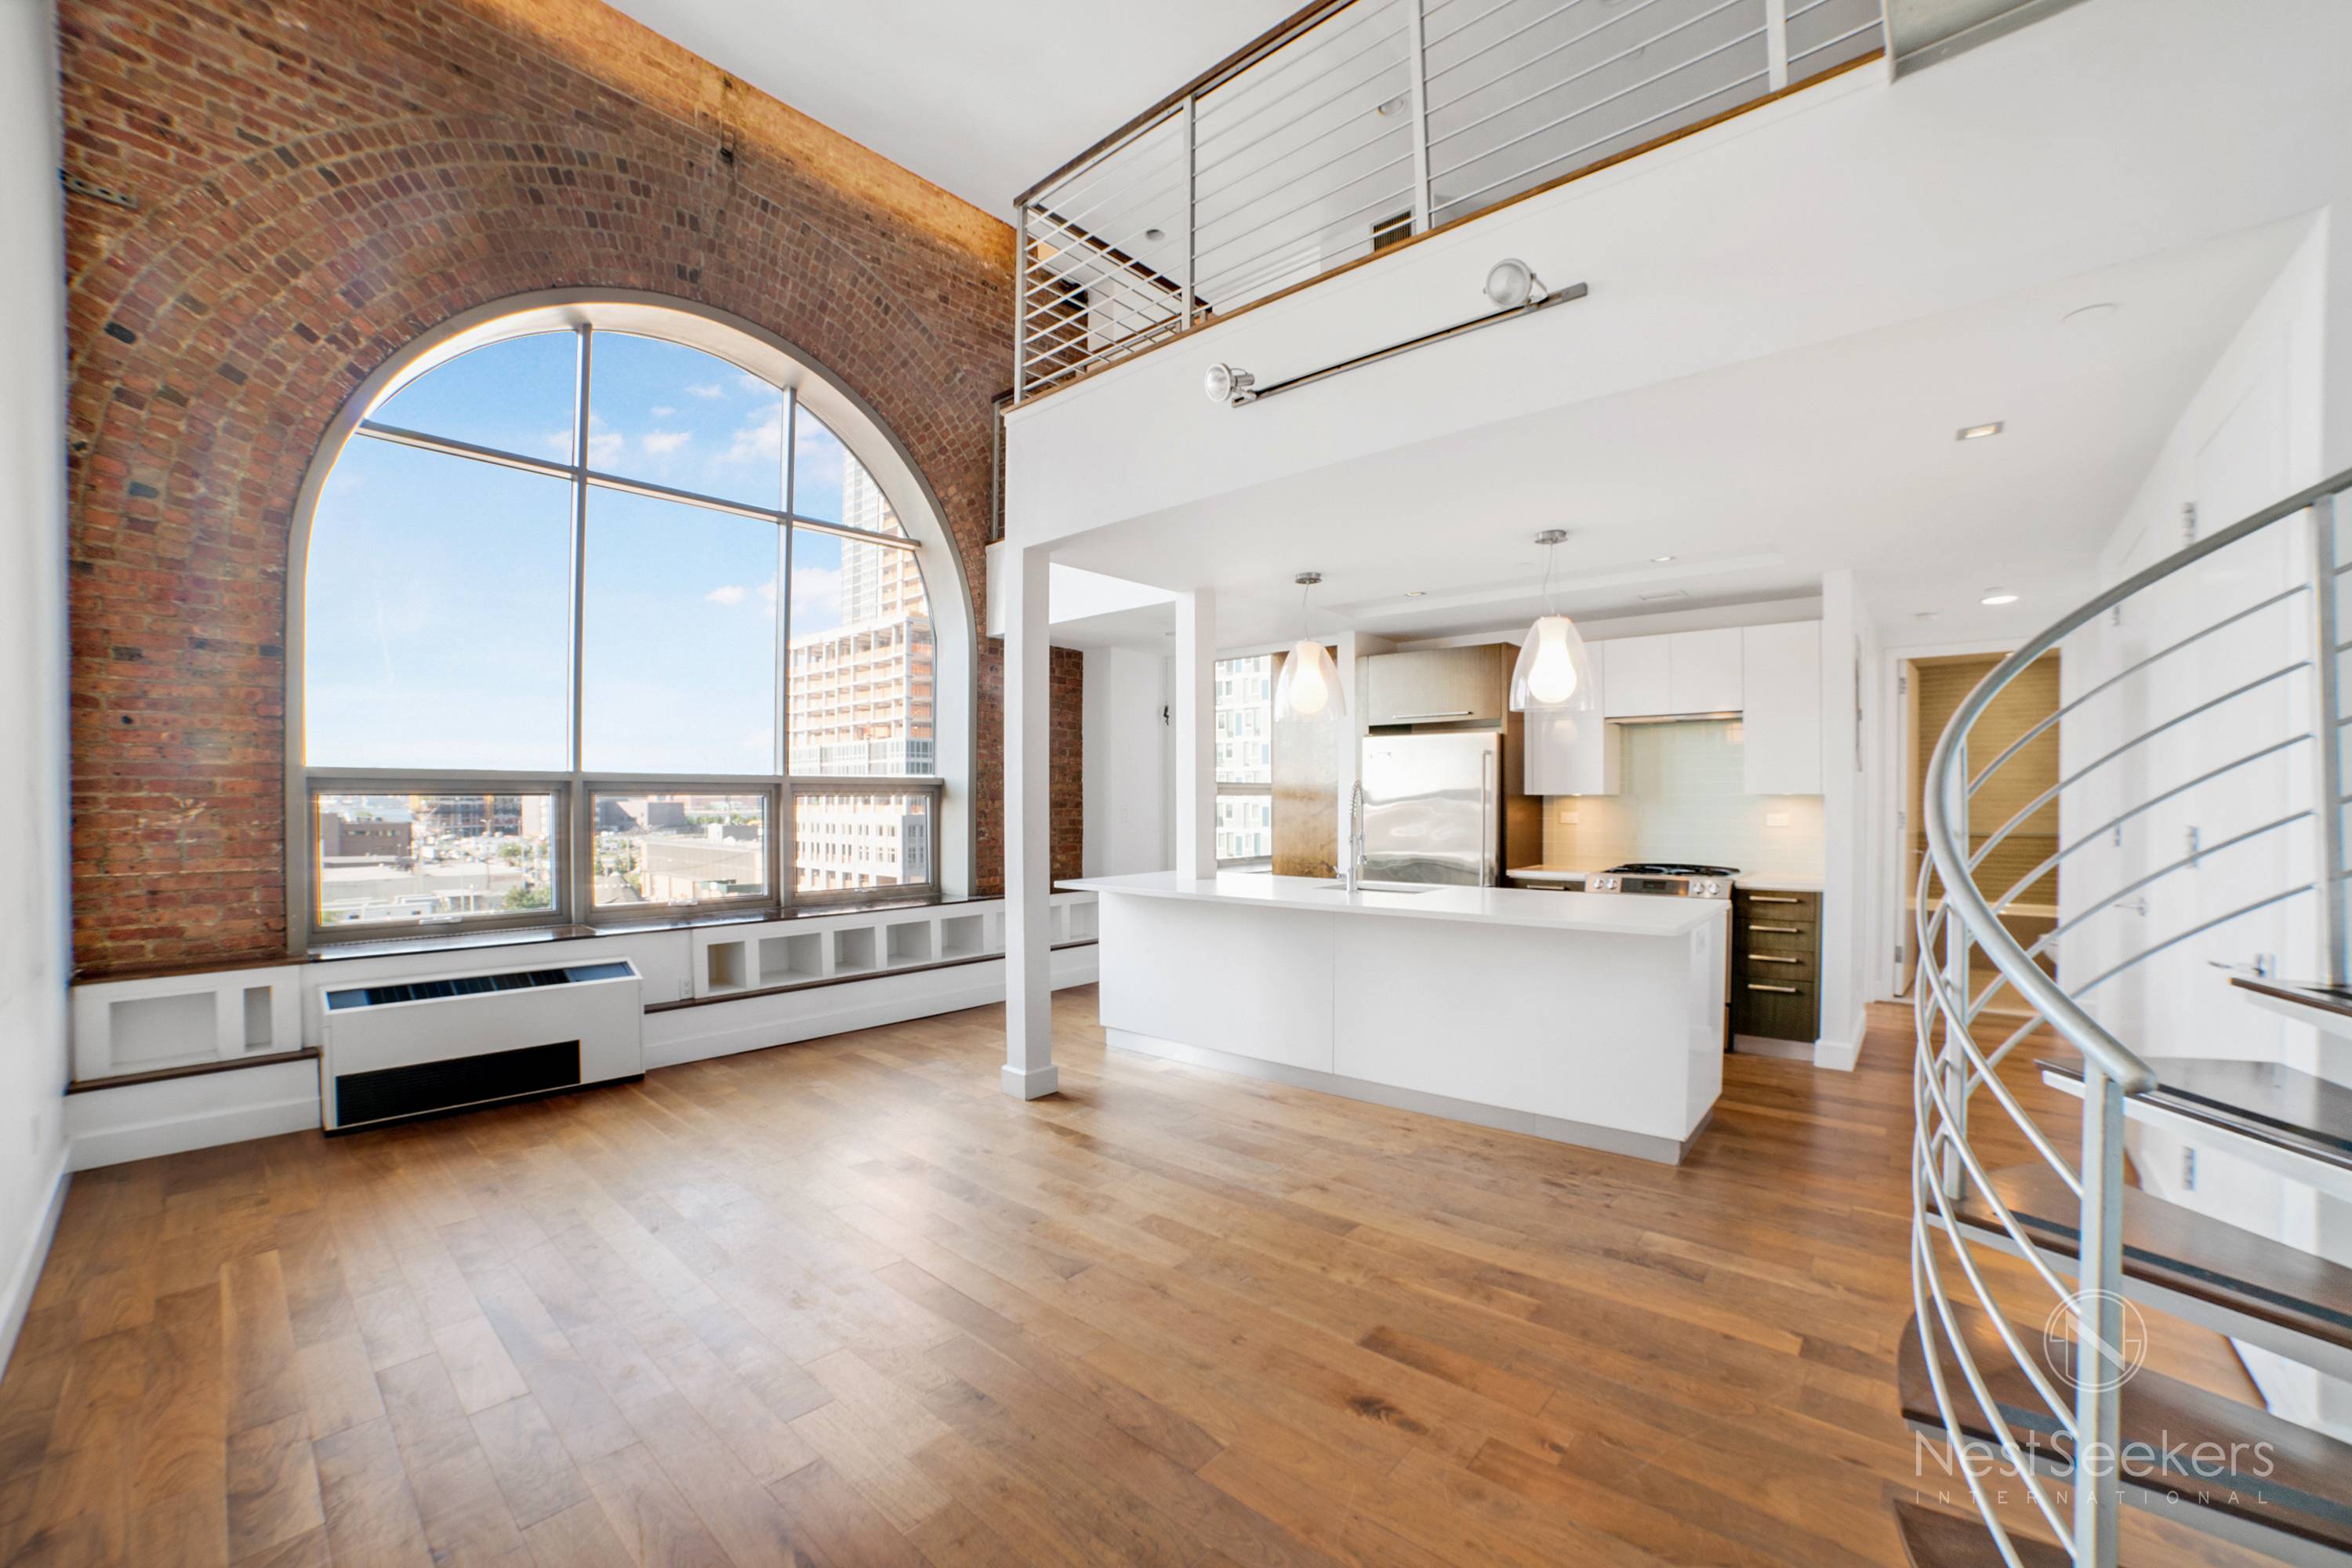 One of a Kind Duplex Loft at the PowerHouse  Condo- Convertible 3 Bedroom